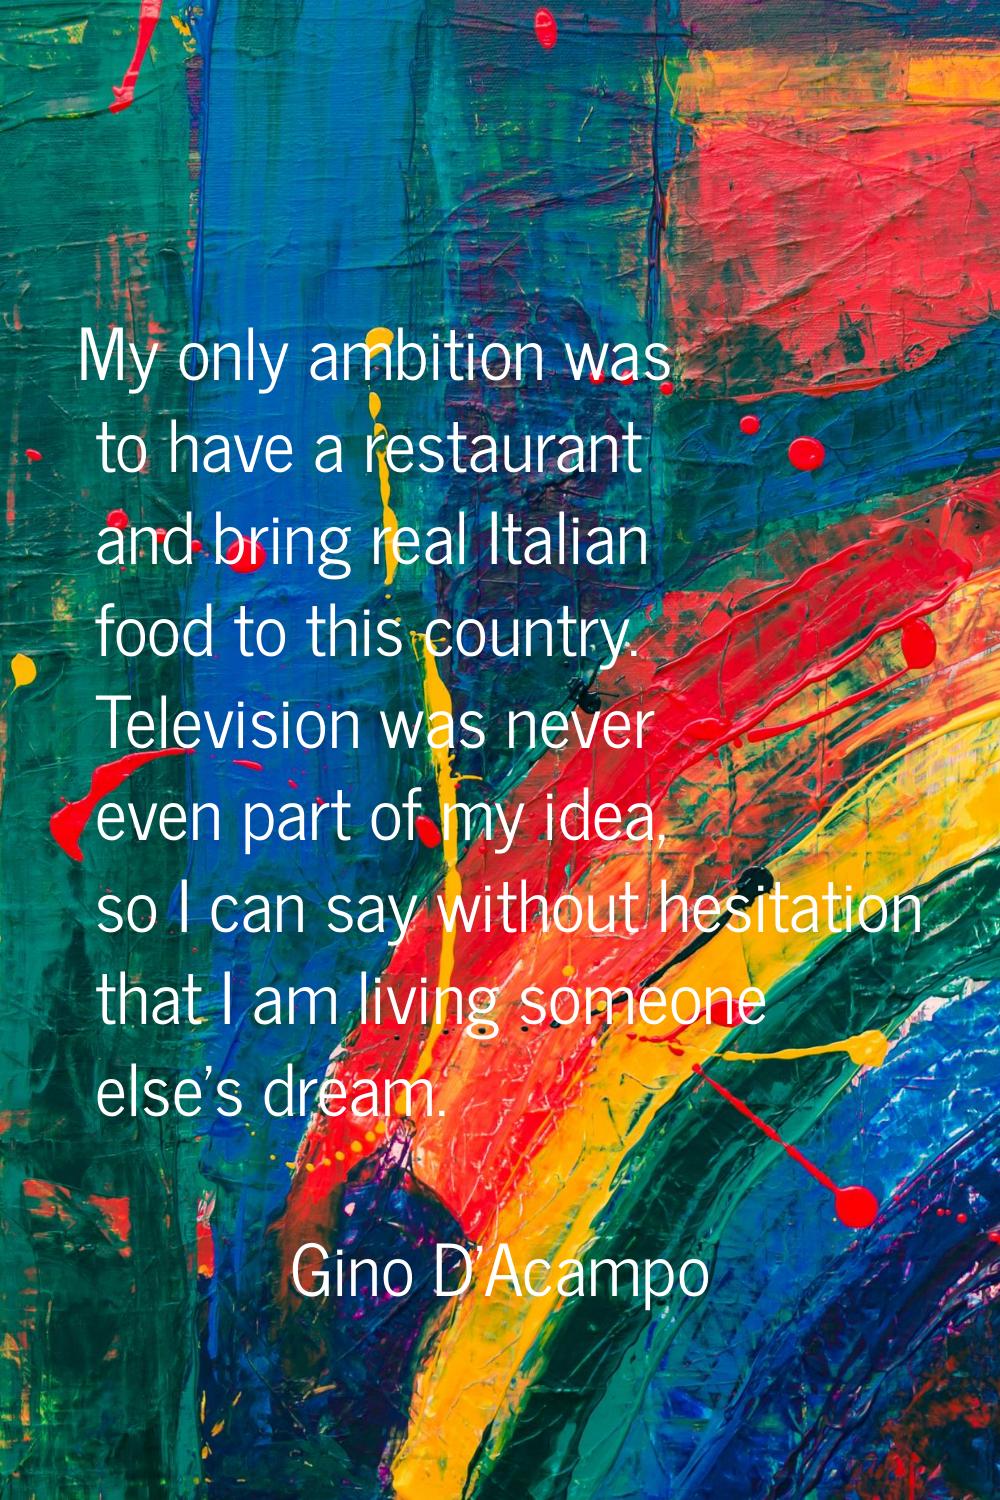 My only ambition was to have a restaurant and bring real Italian food to this country. Television w